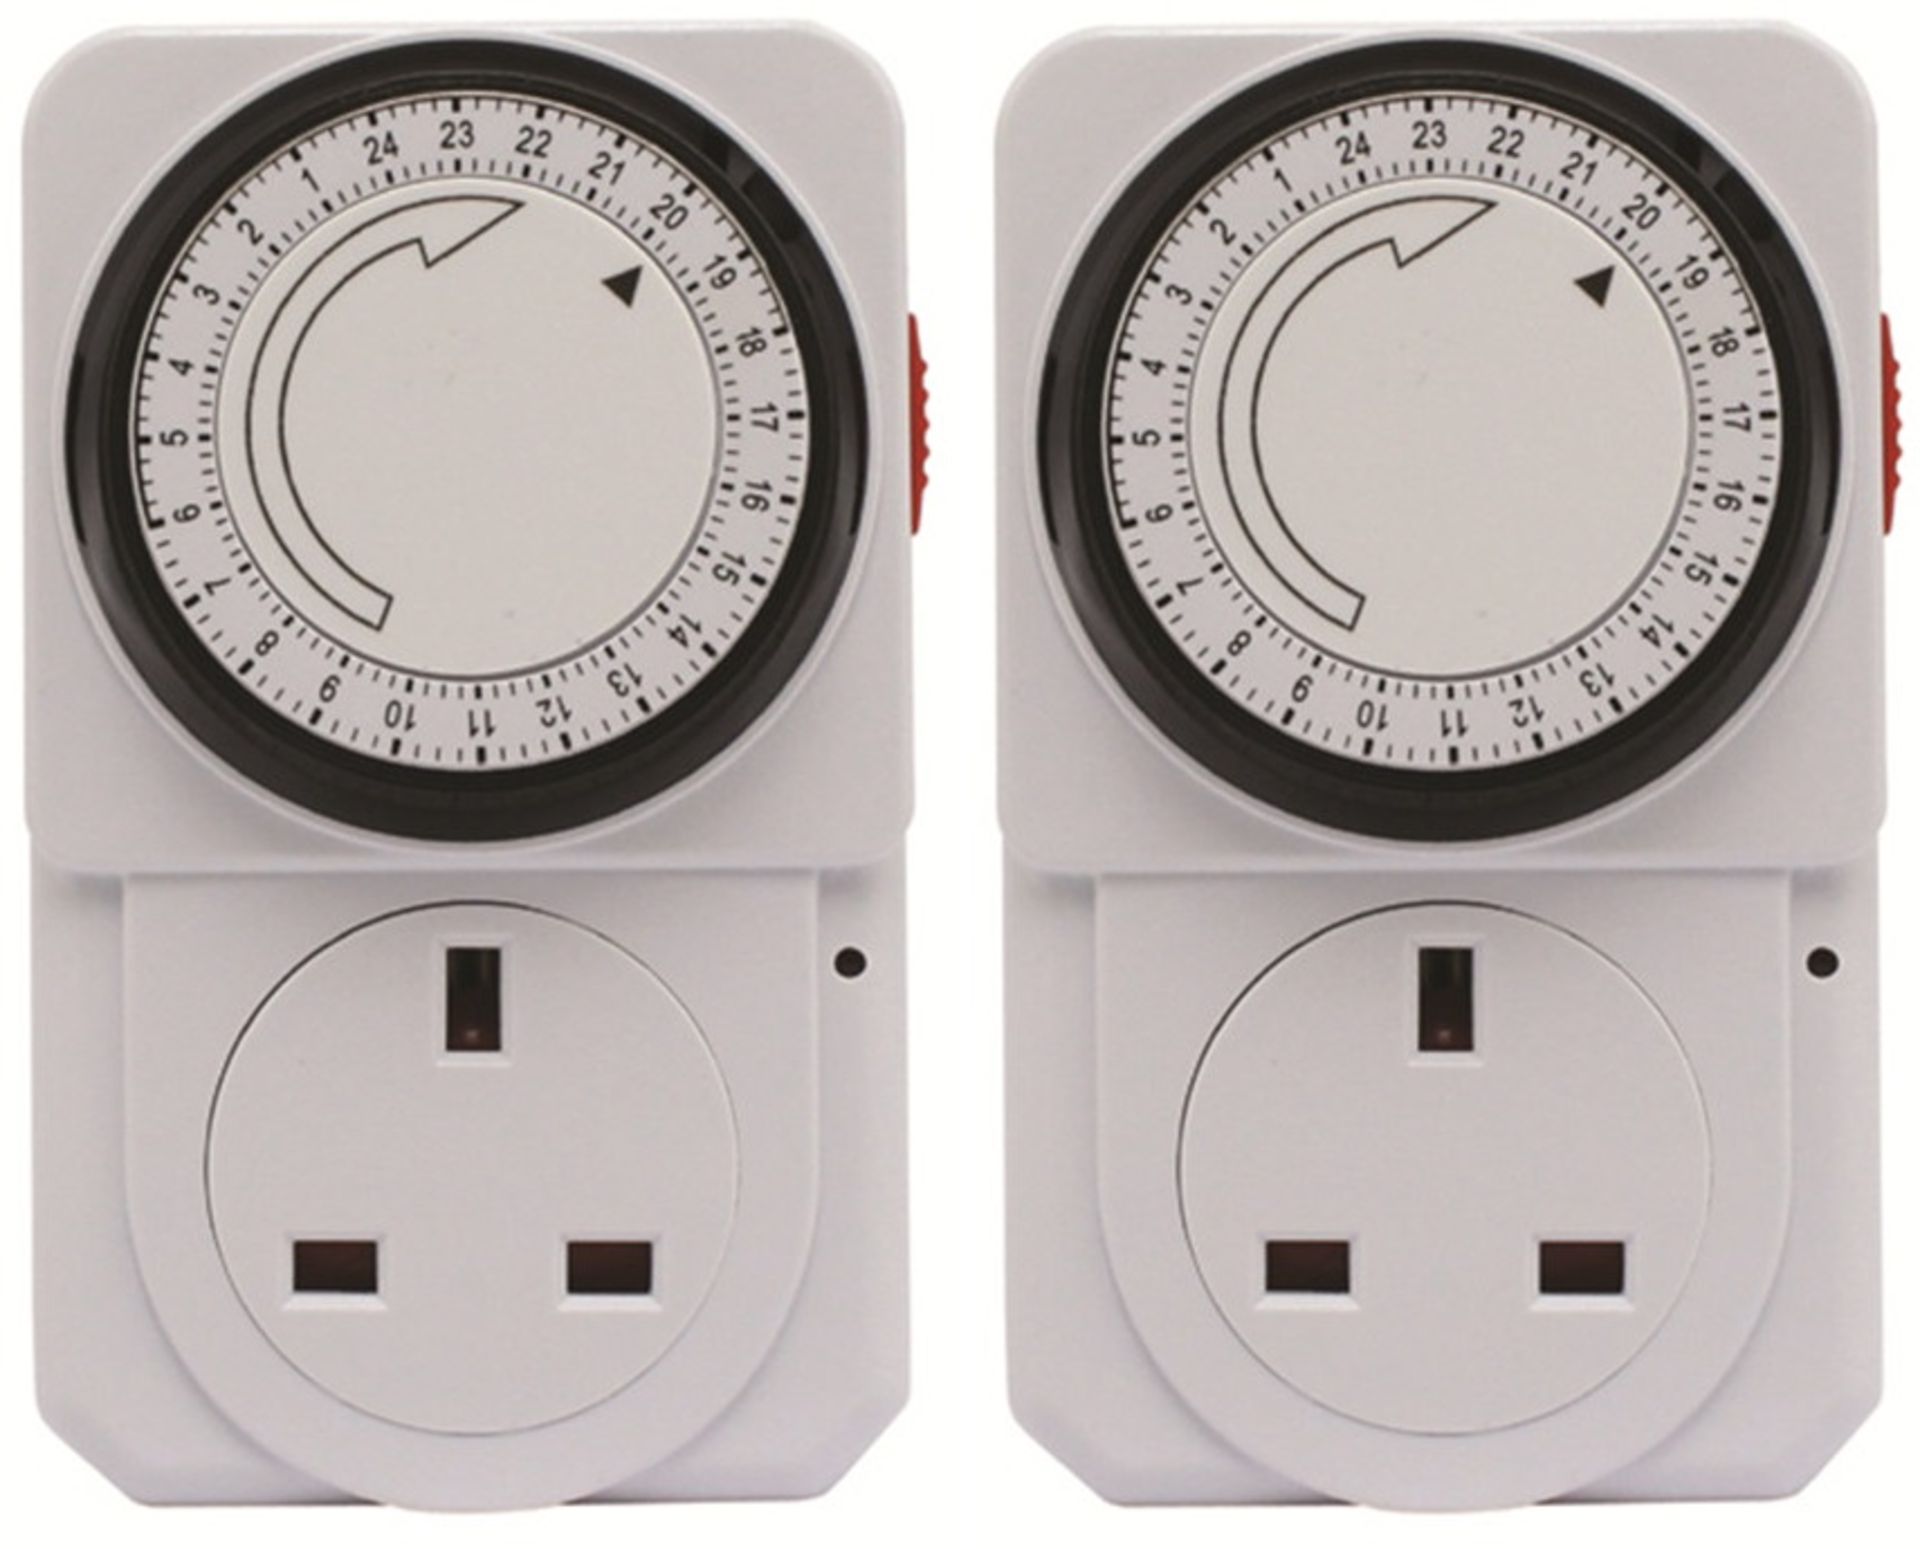 V *TRADE QTY* Brand New Twin Pack Indoor Mechanical Timer Sockets With 24 Hour Timer - 48 Switches